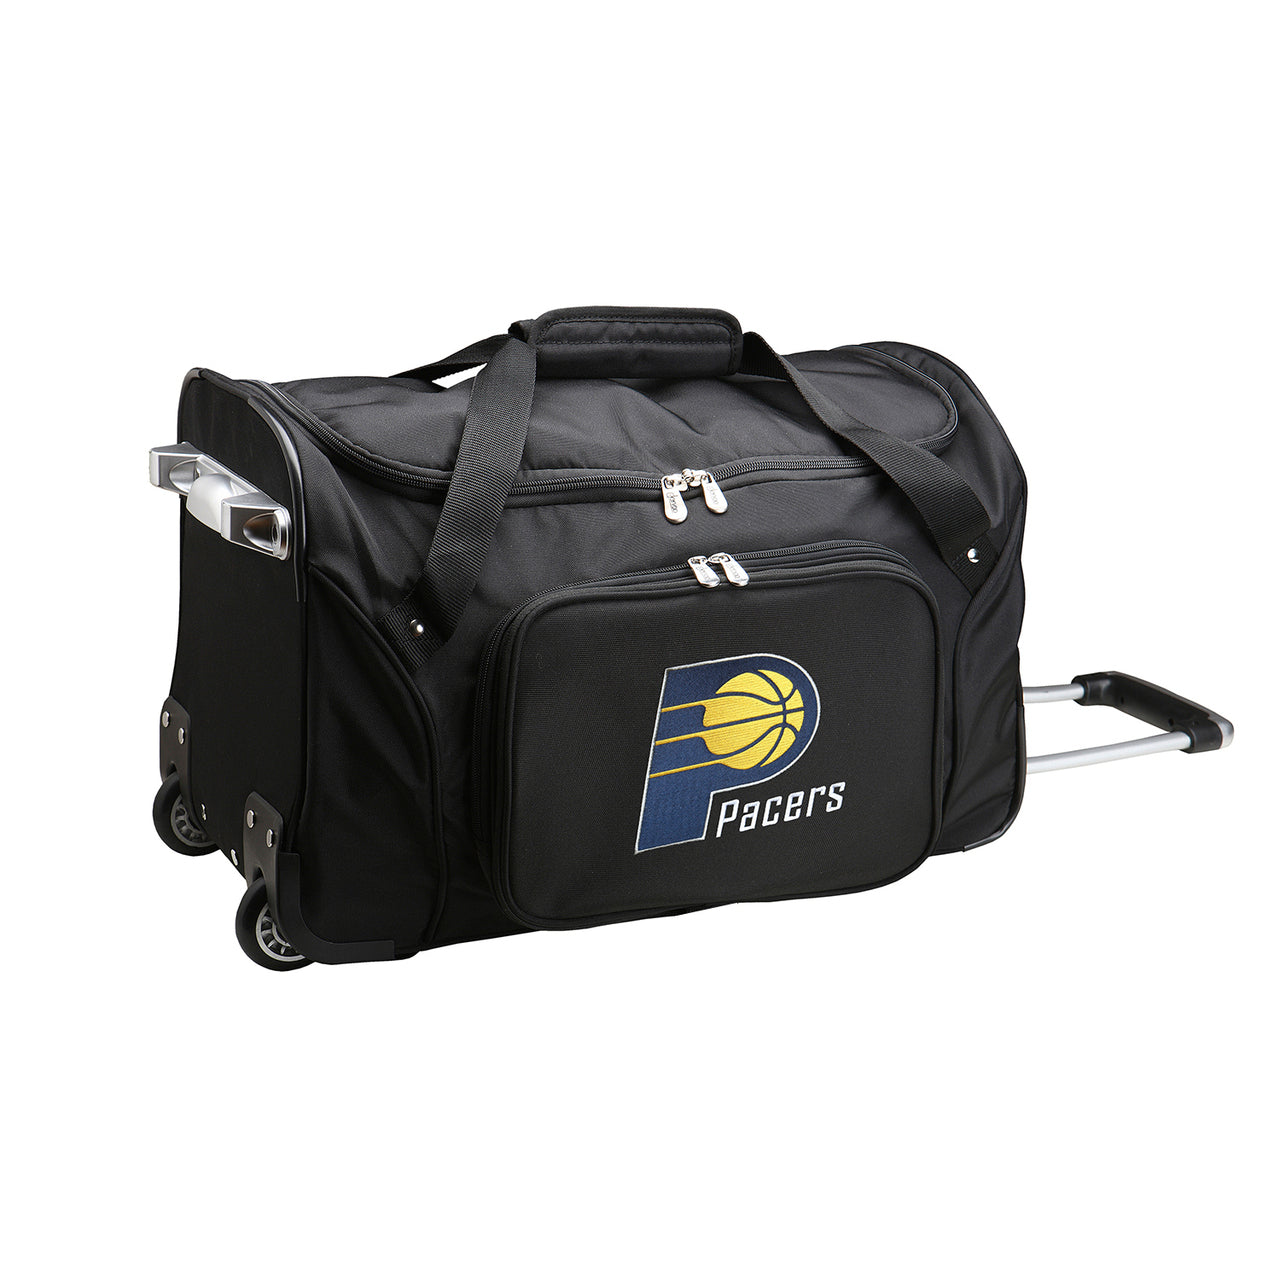 NBA Indiana Pacers Luggage | NBA Indiana Pacers Wheeled Carry On Luggage